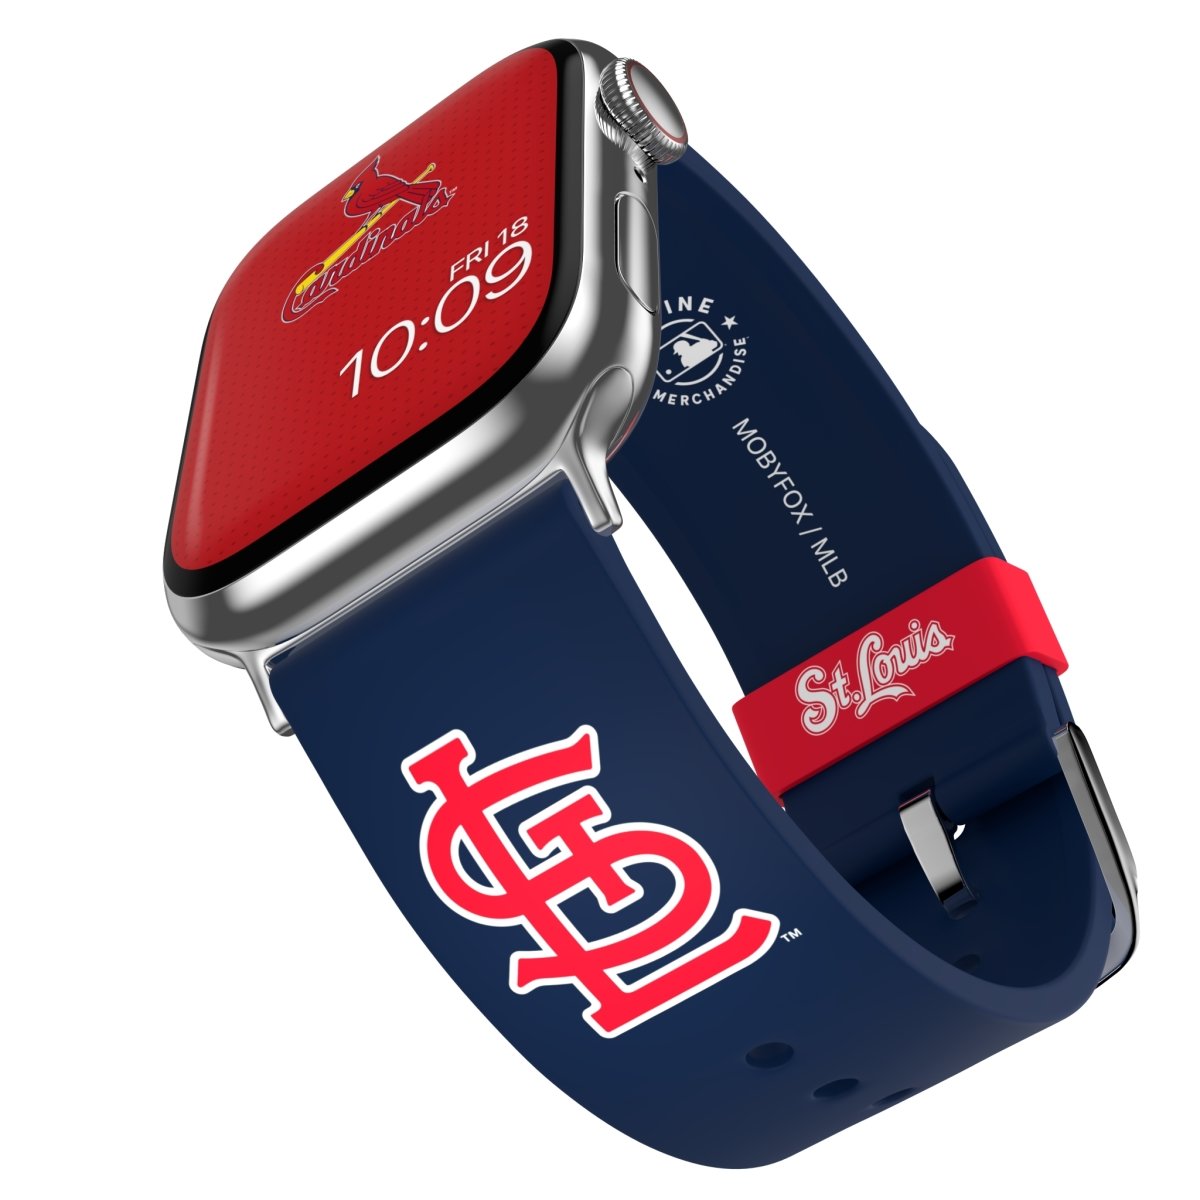 This Officially Licensed Watch Band Includes 20+ Exclusive Watch Faces MLB - St. Louis Cardinals Apple Watch Band | Officially Licensed | MobyFox